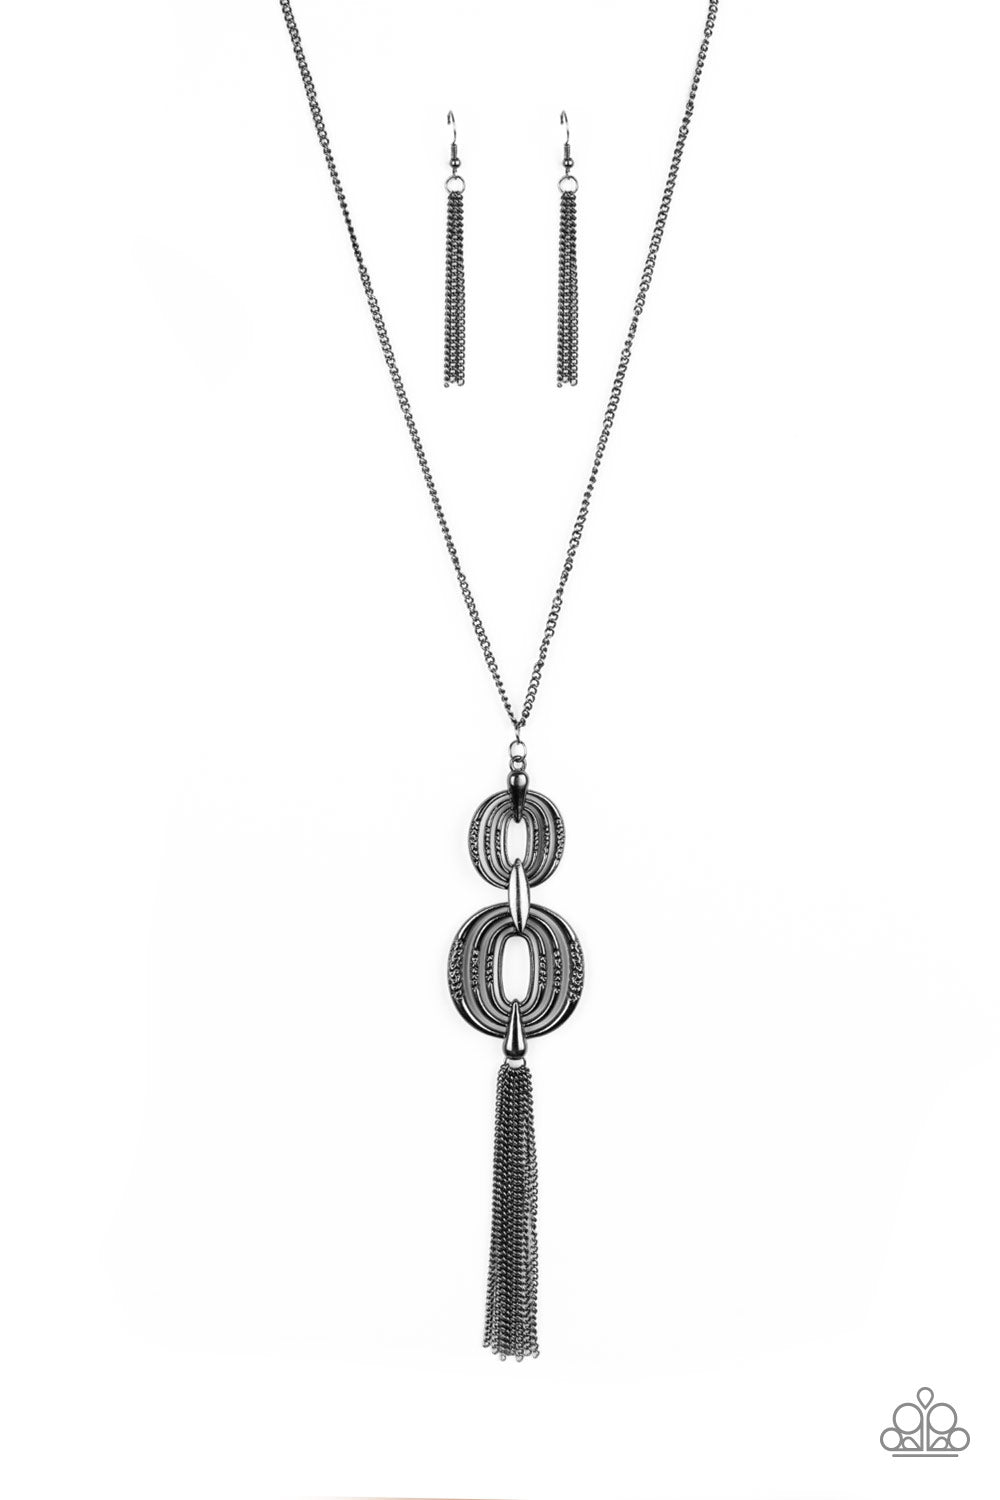 Bold statement necklace, sections of shimmer, gunmetal circular frames stack into a bold pendant 